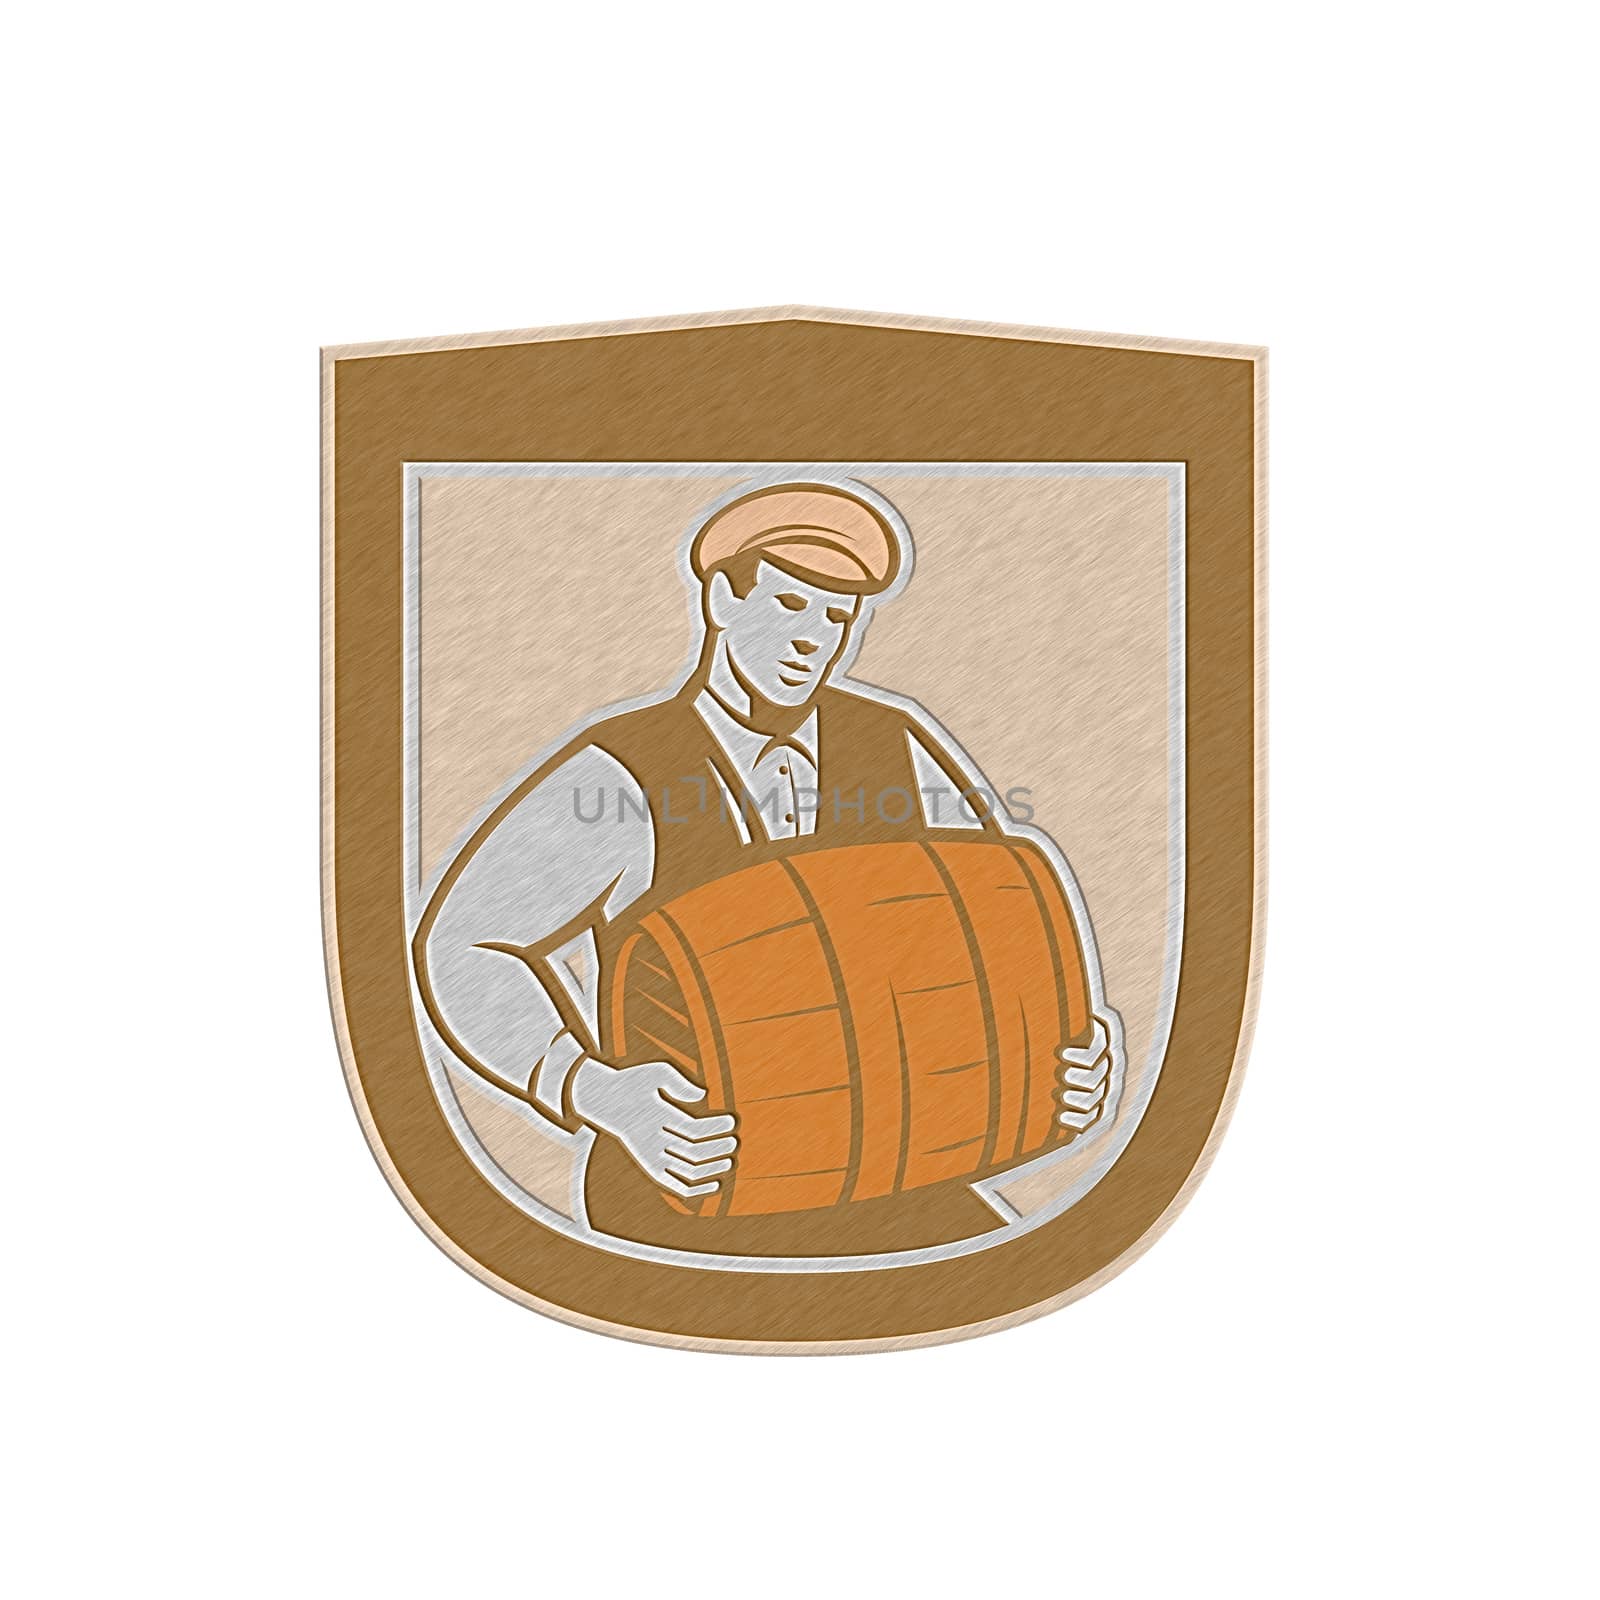 Metallic styled illustration of a bartender worker carrying keg set inside shield crest on isolated white background done in retro style. 